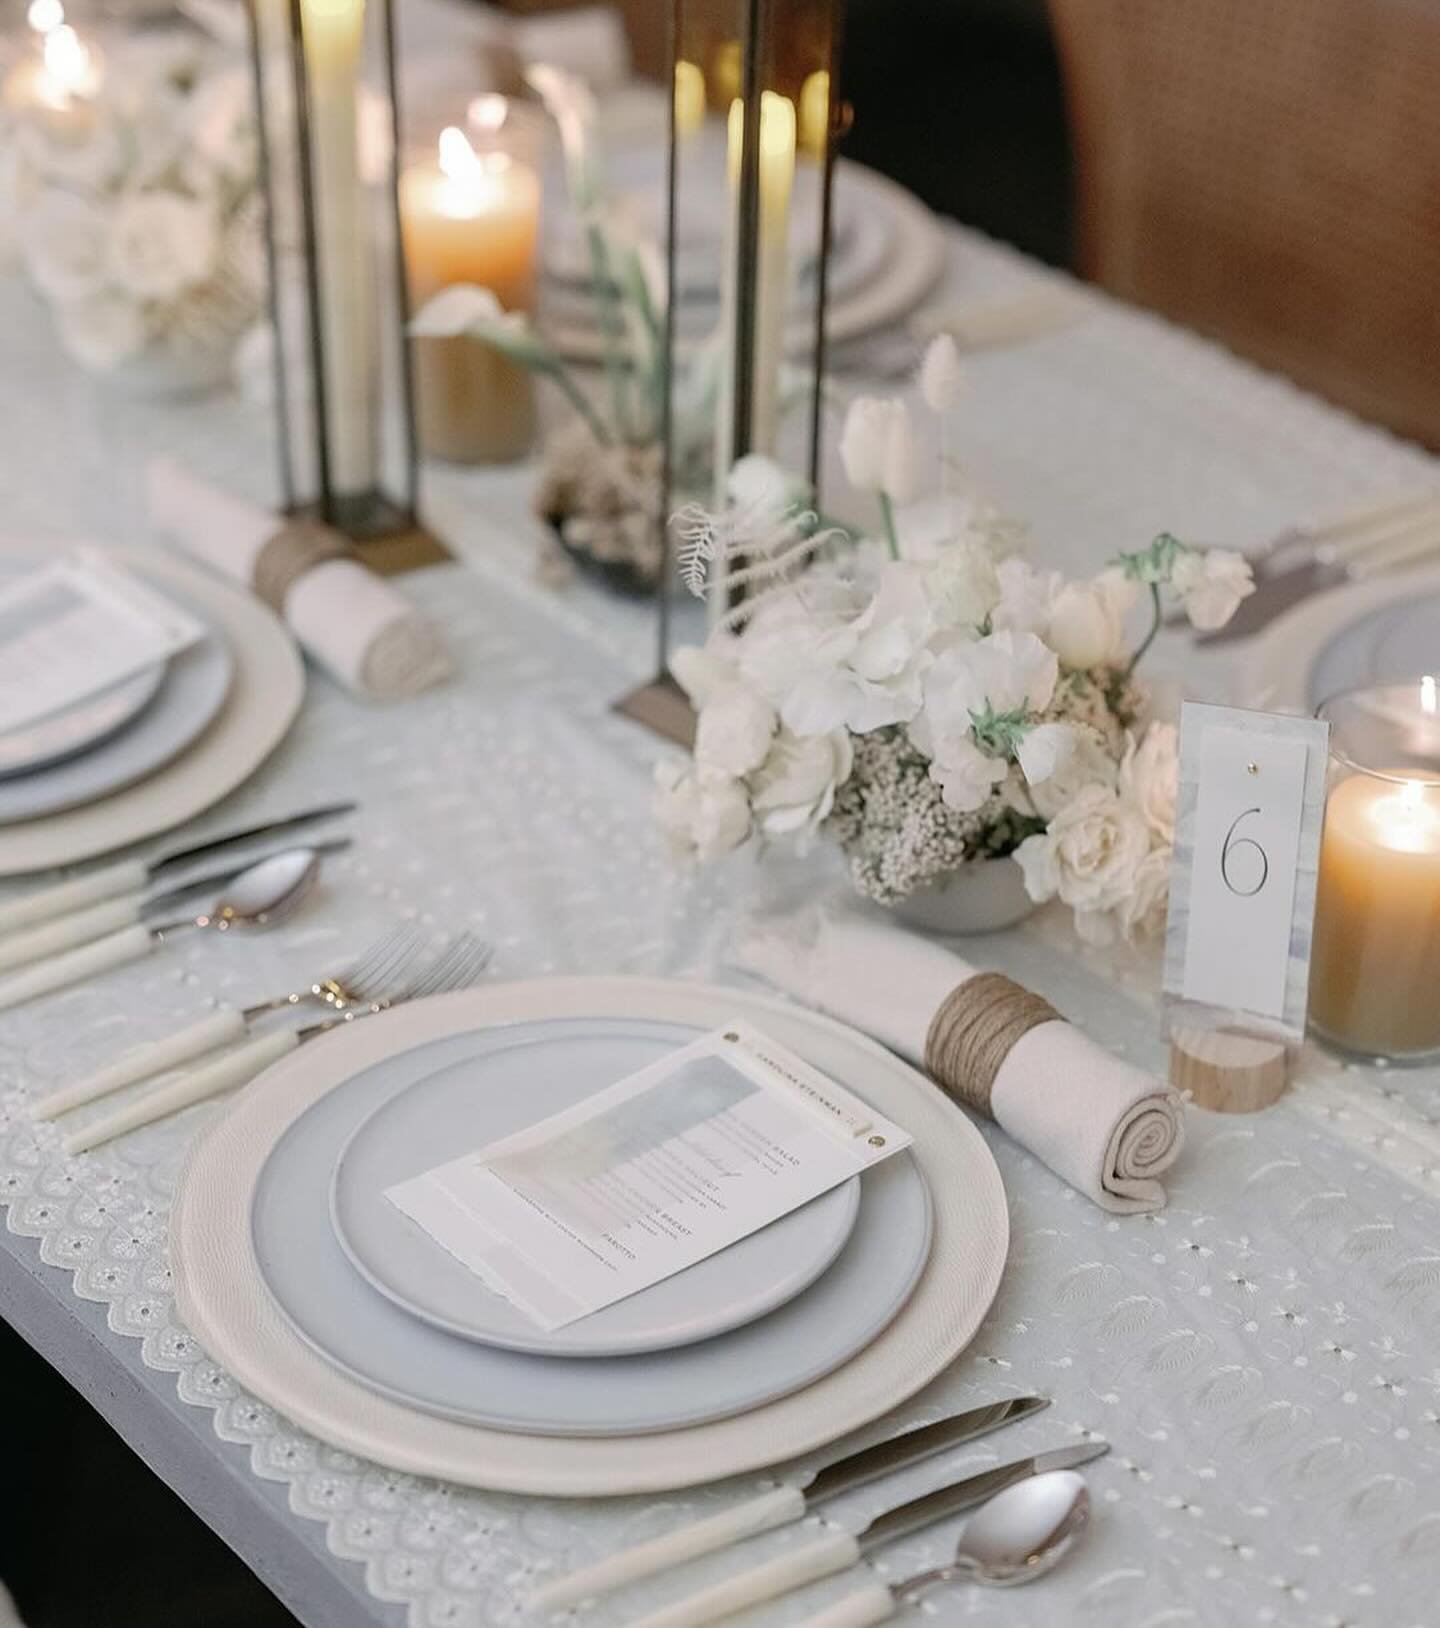 SMORE LOVE.

With a tablescape adorned with minimalistic charm, a bespoke menu complemented by signature drinks, and the promise of crafting the perfect s&rsquo;more, every detail of this celebration was meticulously curated for an unforgettable expe